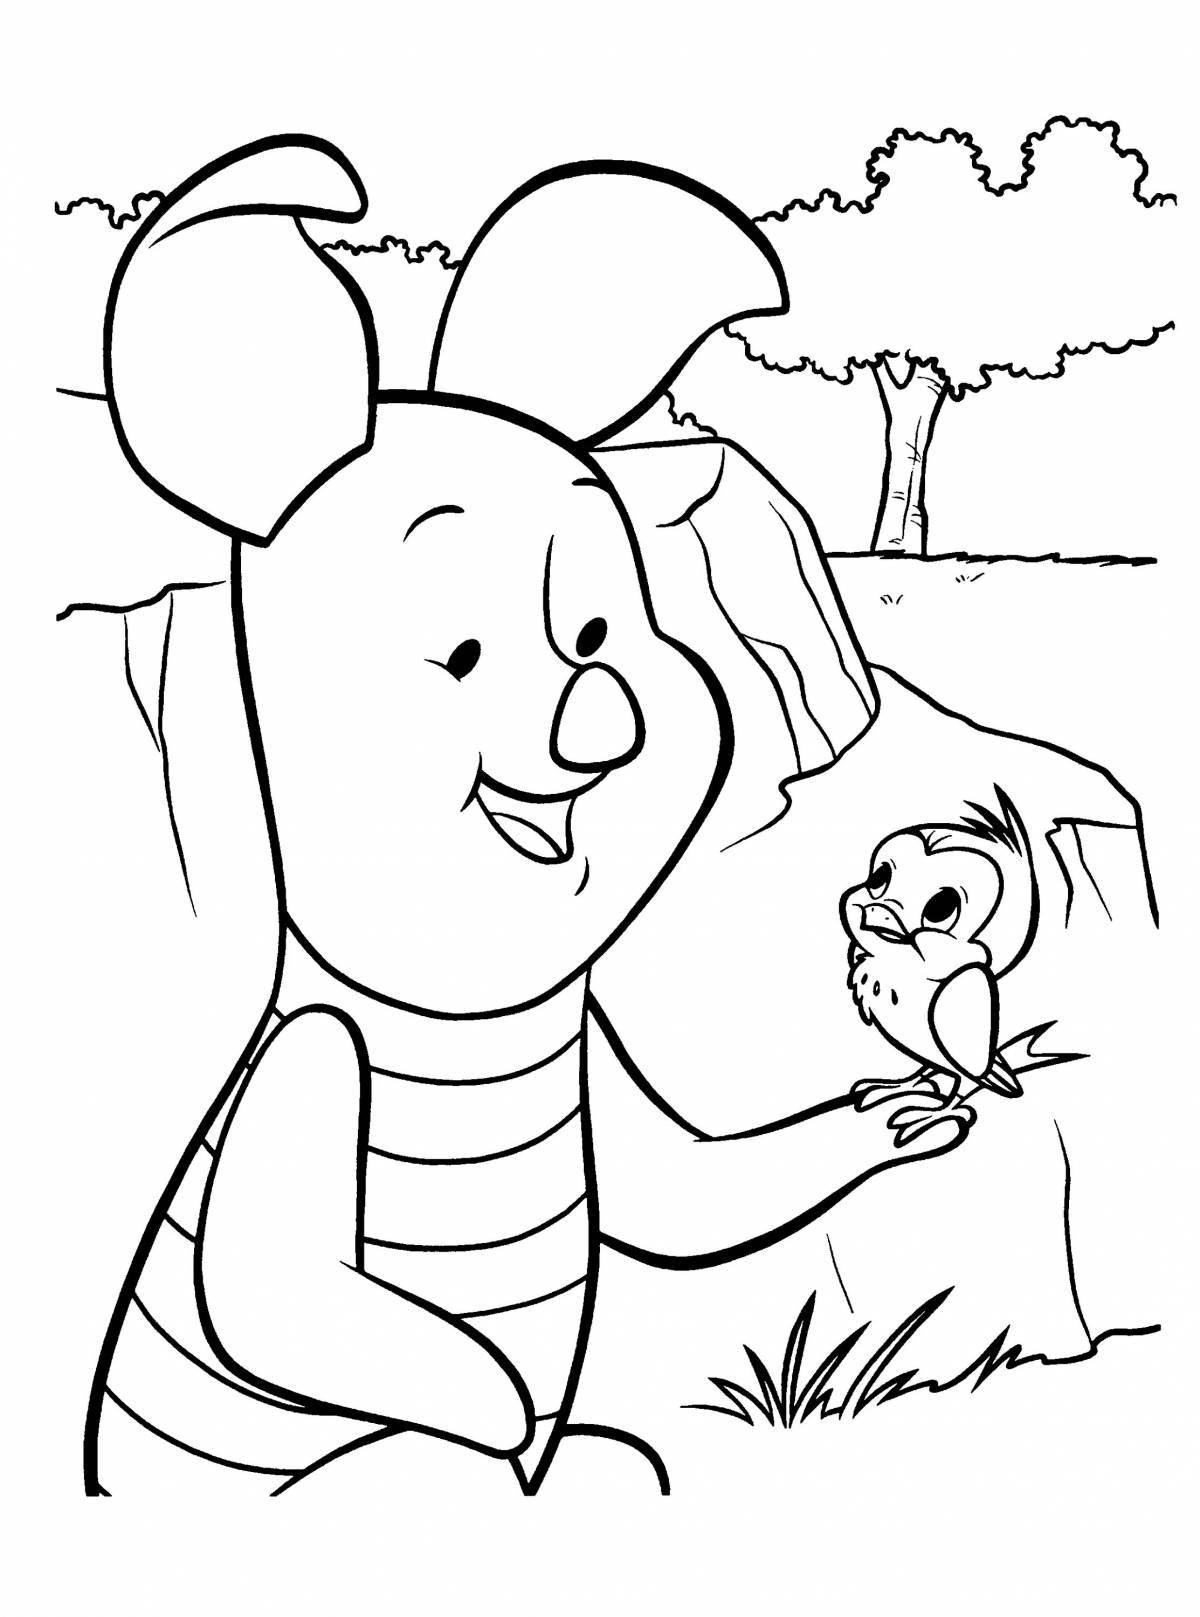 Playful Winnie the Pooh and his friends Soviet coloring